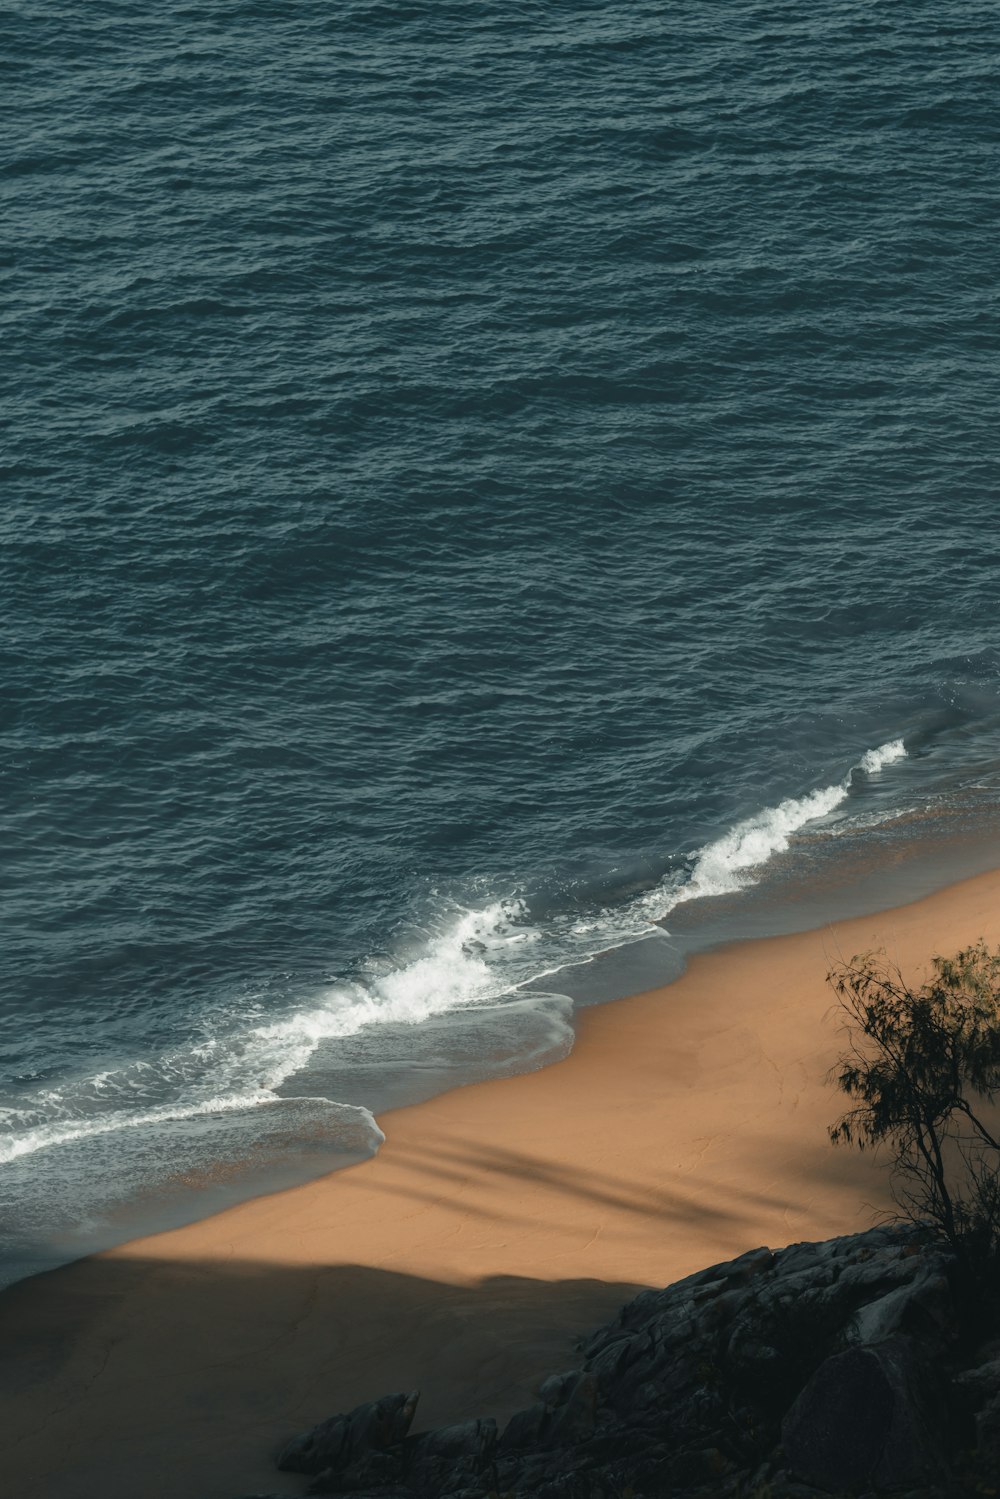 a lone tree on a sandy beach next to the ocean